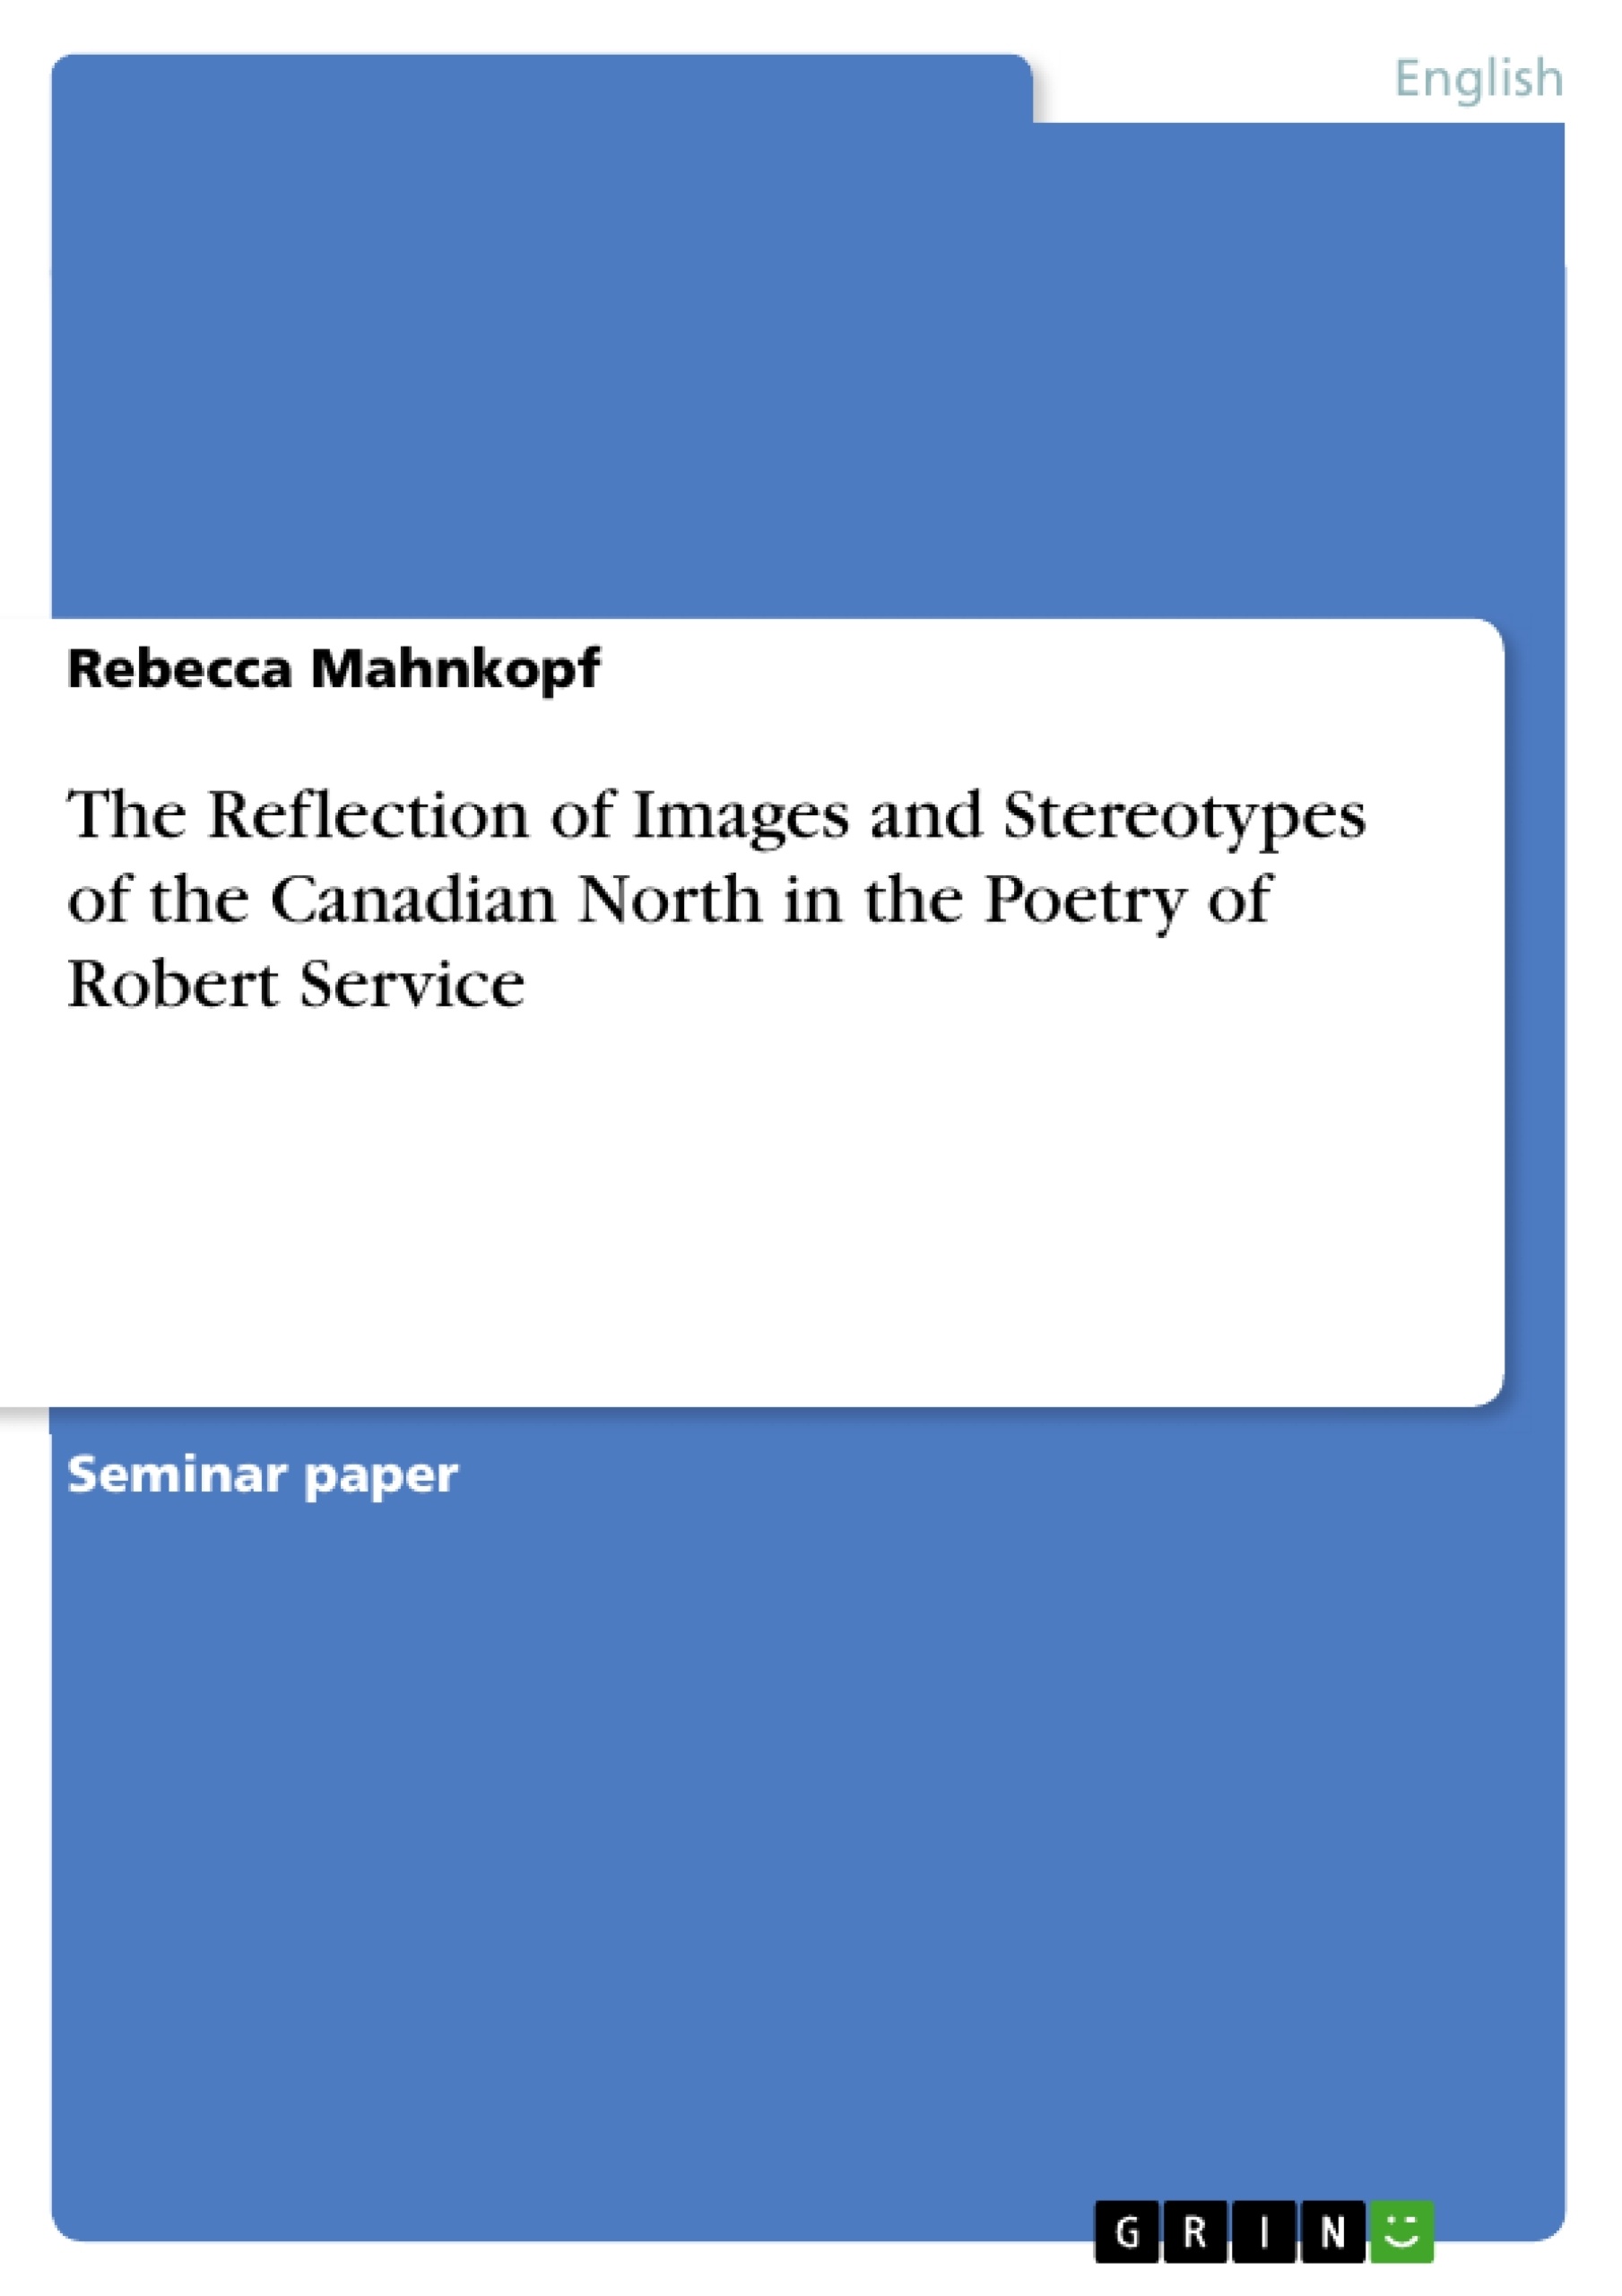 Titre: The Reflection of Images and Stereotypes of the Canadian North in the Poetry of Robert Service